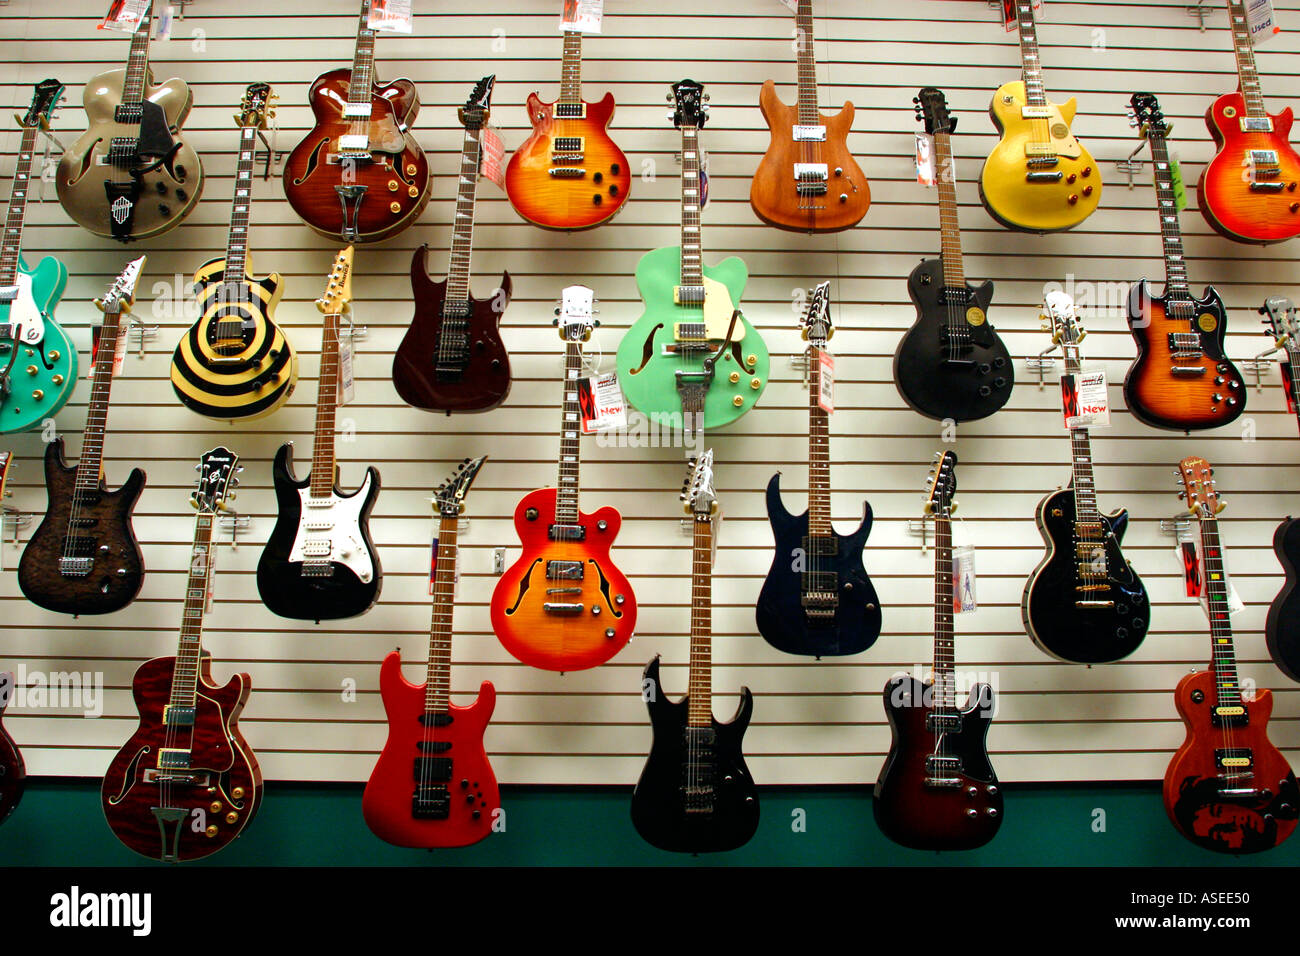 Electric Guitars at Music Store Stock Photo - Alamy